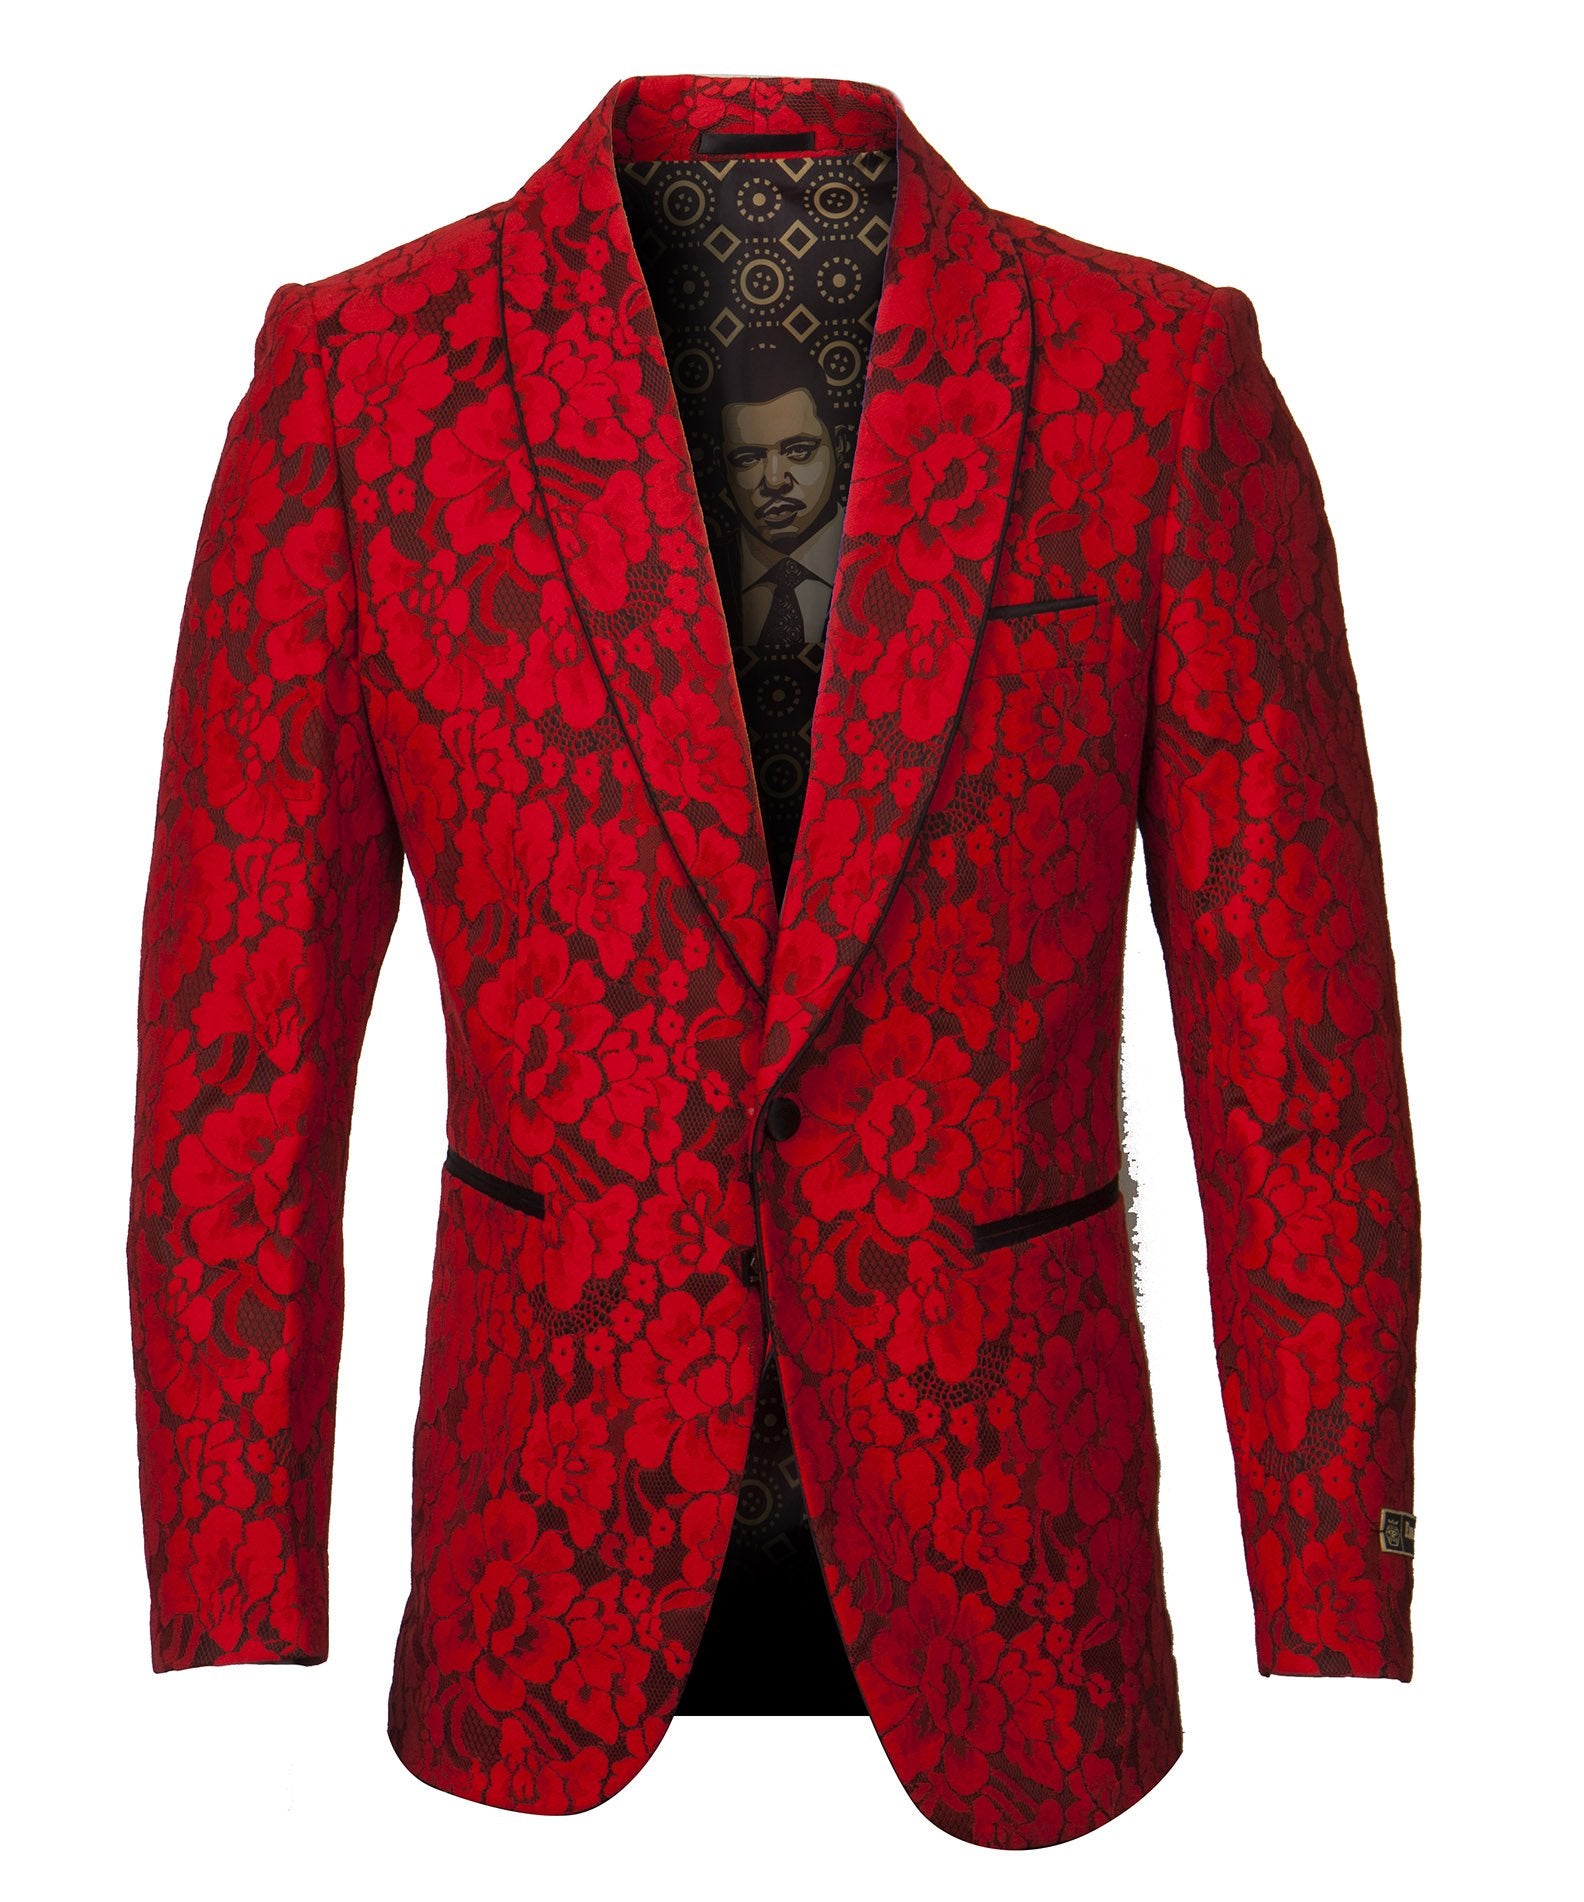 Cielo Red / Metallic Gold Embroidered Satin Classic Fit Blazer / Bow Tie  B6387 - $129.90 :: Upscale Menswear 